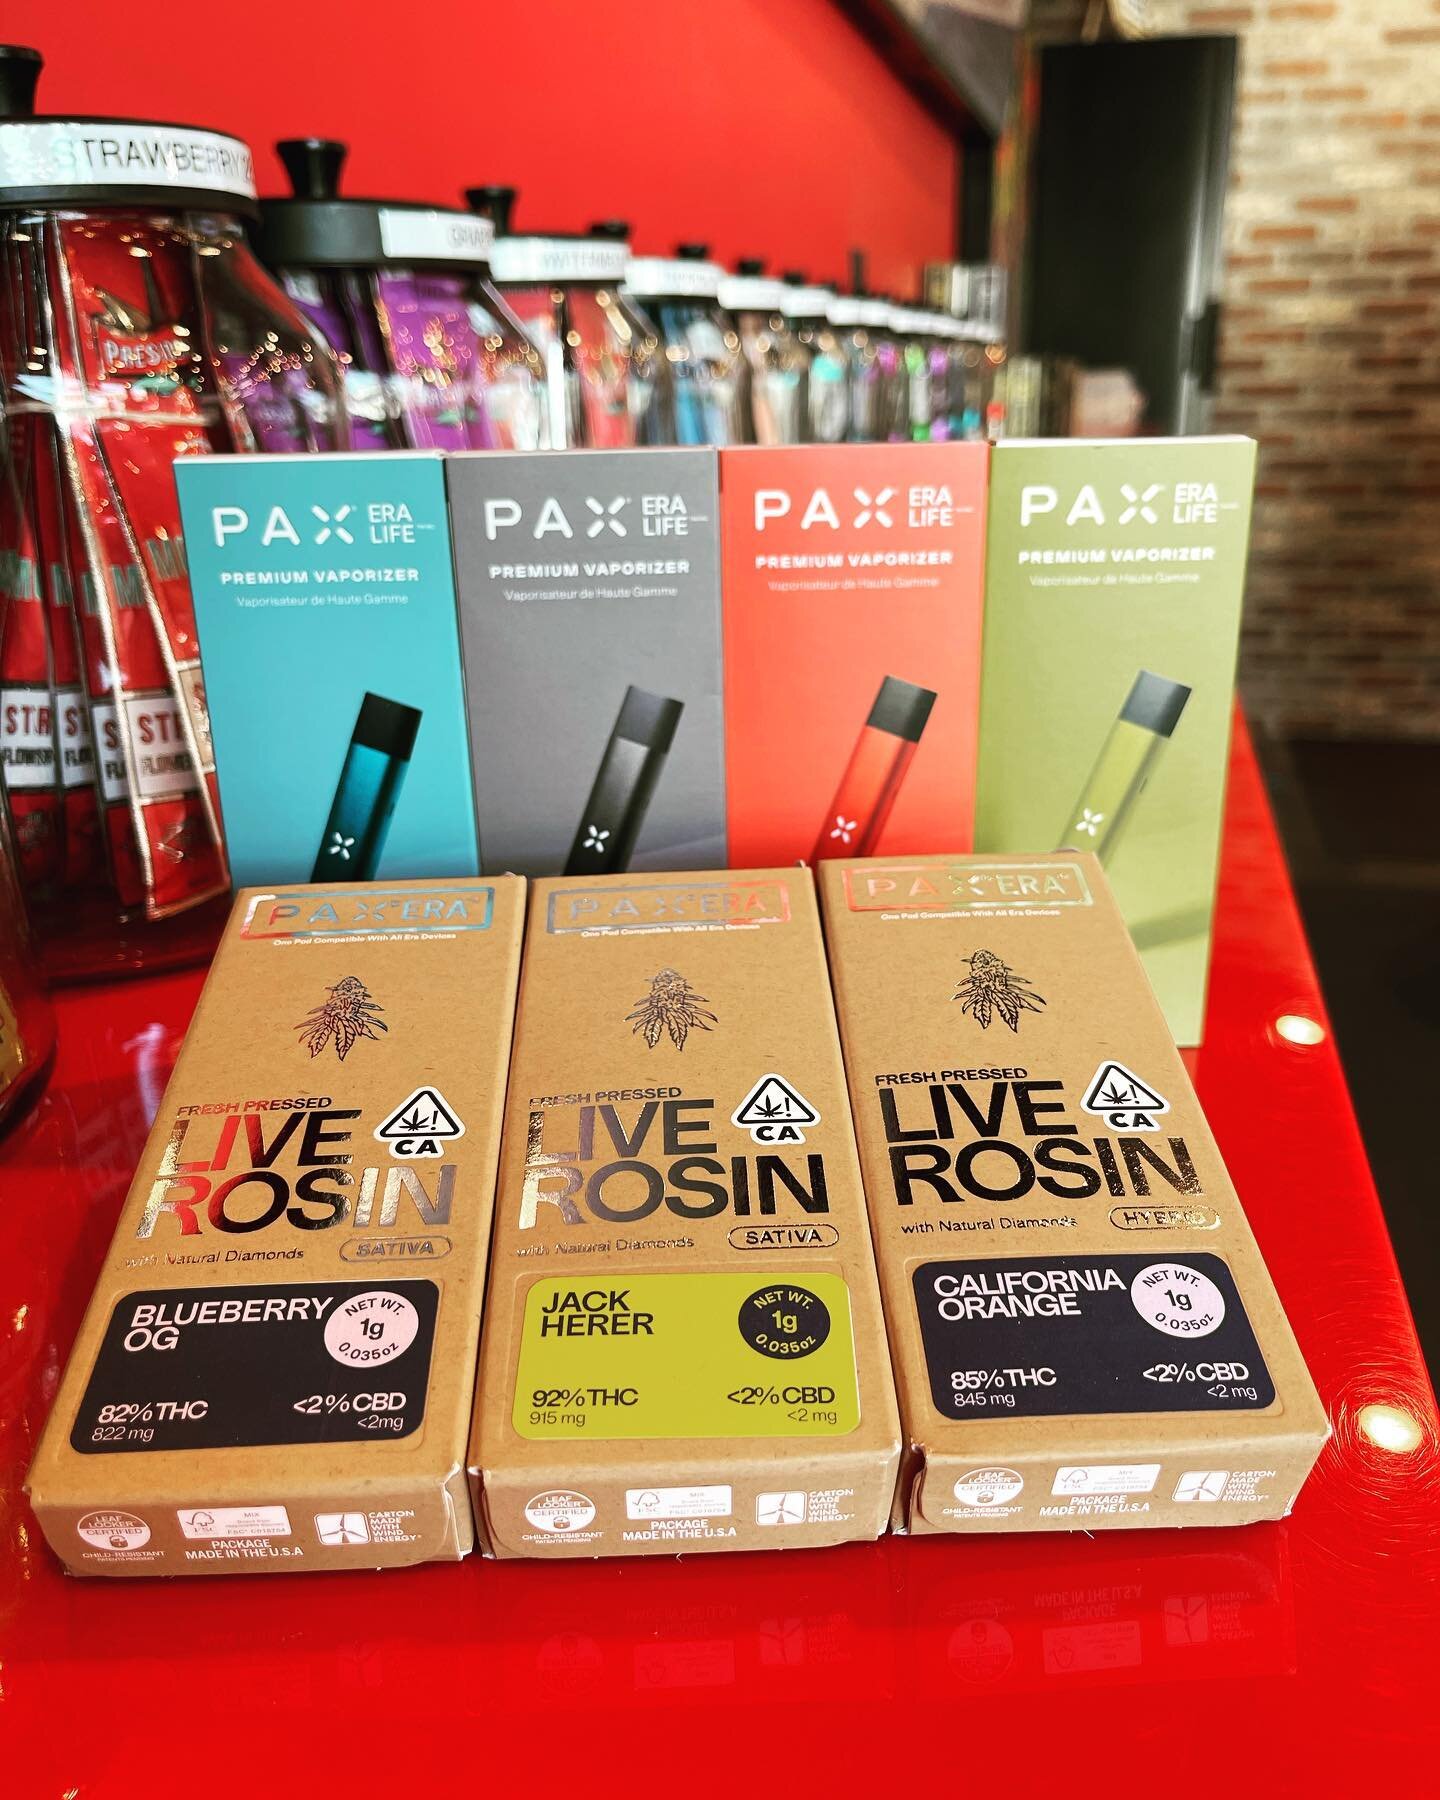 ‼️EXCLUSIVE‼️@pax_official has launched their new Live Rosin Pax Era Life pods - Full spectrum effects have never been easier to have on hand🤩 #discreet #paxeralife #freshfrozen #fullspectrum #cbg #bloomroomdispenaries